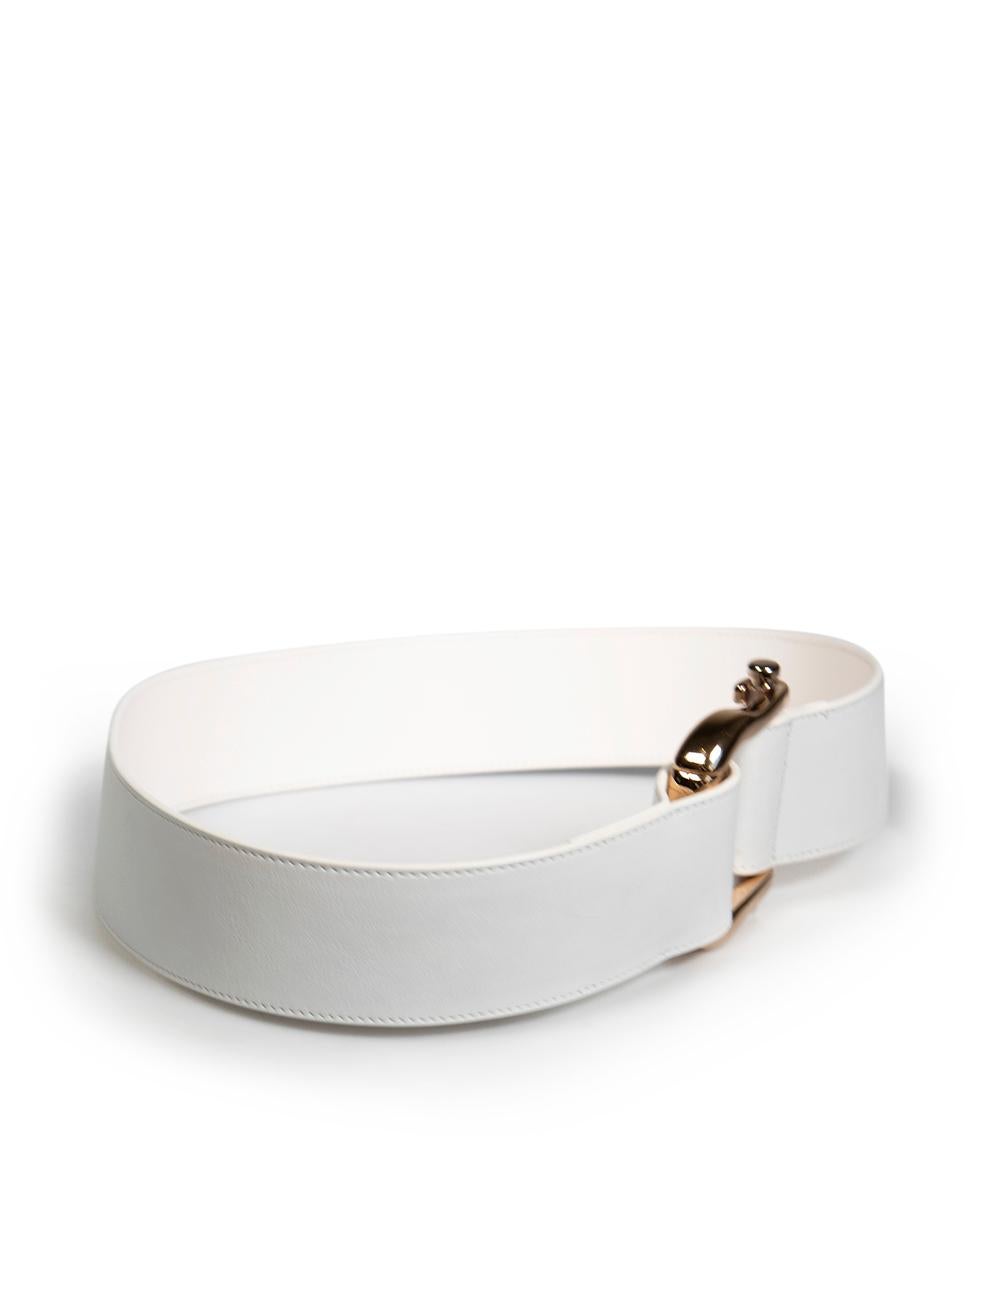 CONDITION is Very good. Minimal wear to belt is evident. Minimal wear to the front with a small mark on this used Gabriela Hearst designer resale item. This item comes with original dust bag.
 
 
 
 Details
 
 
 White
 
 Leather
 
 Waist belt
 
